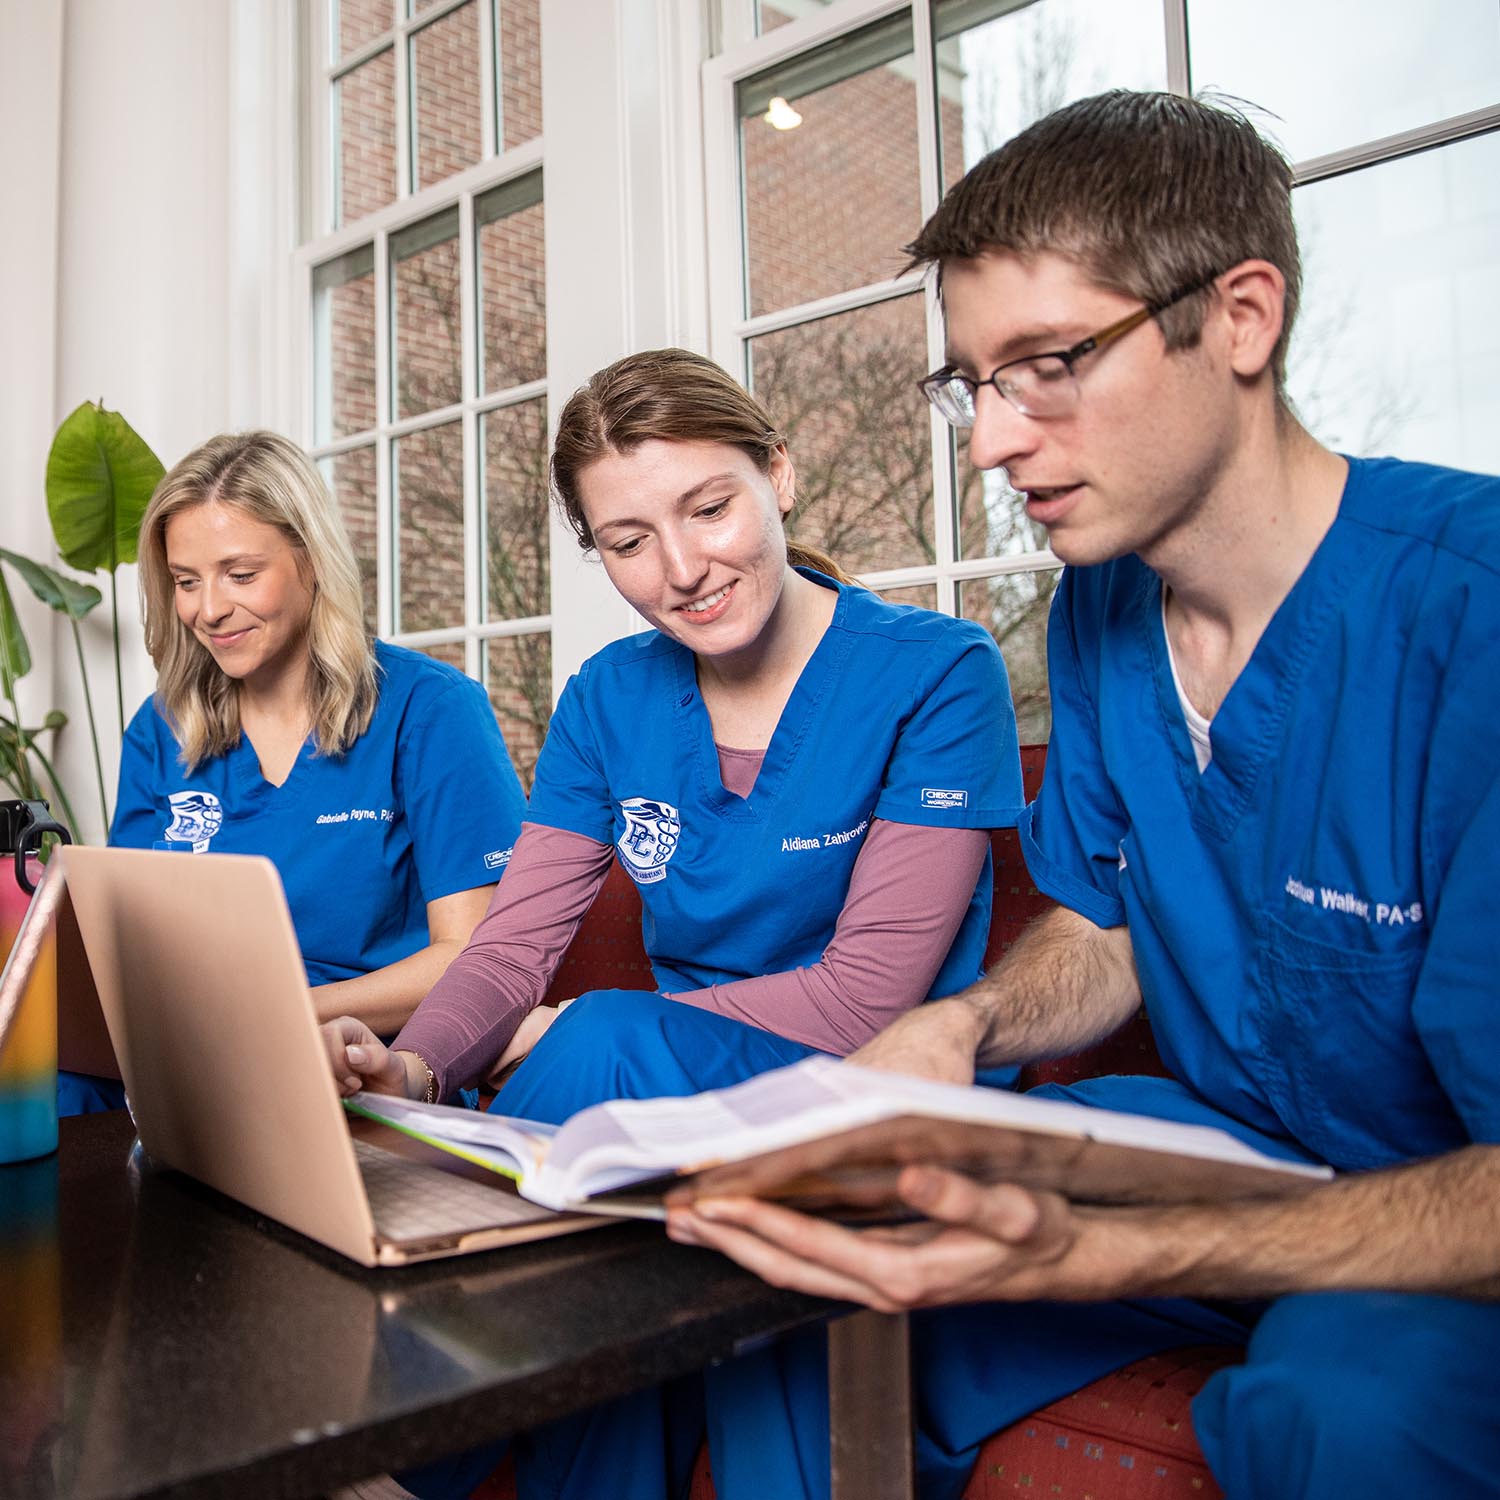 Two female medical students and male student, all wearing blue scrubs, working on a laptop PC.